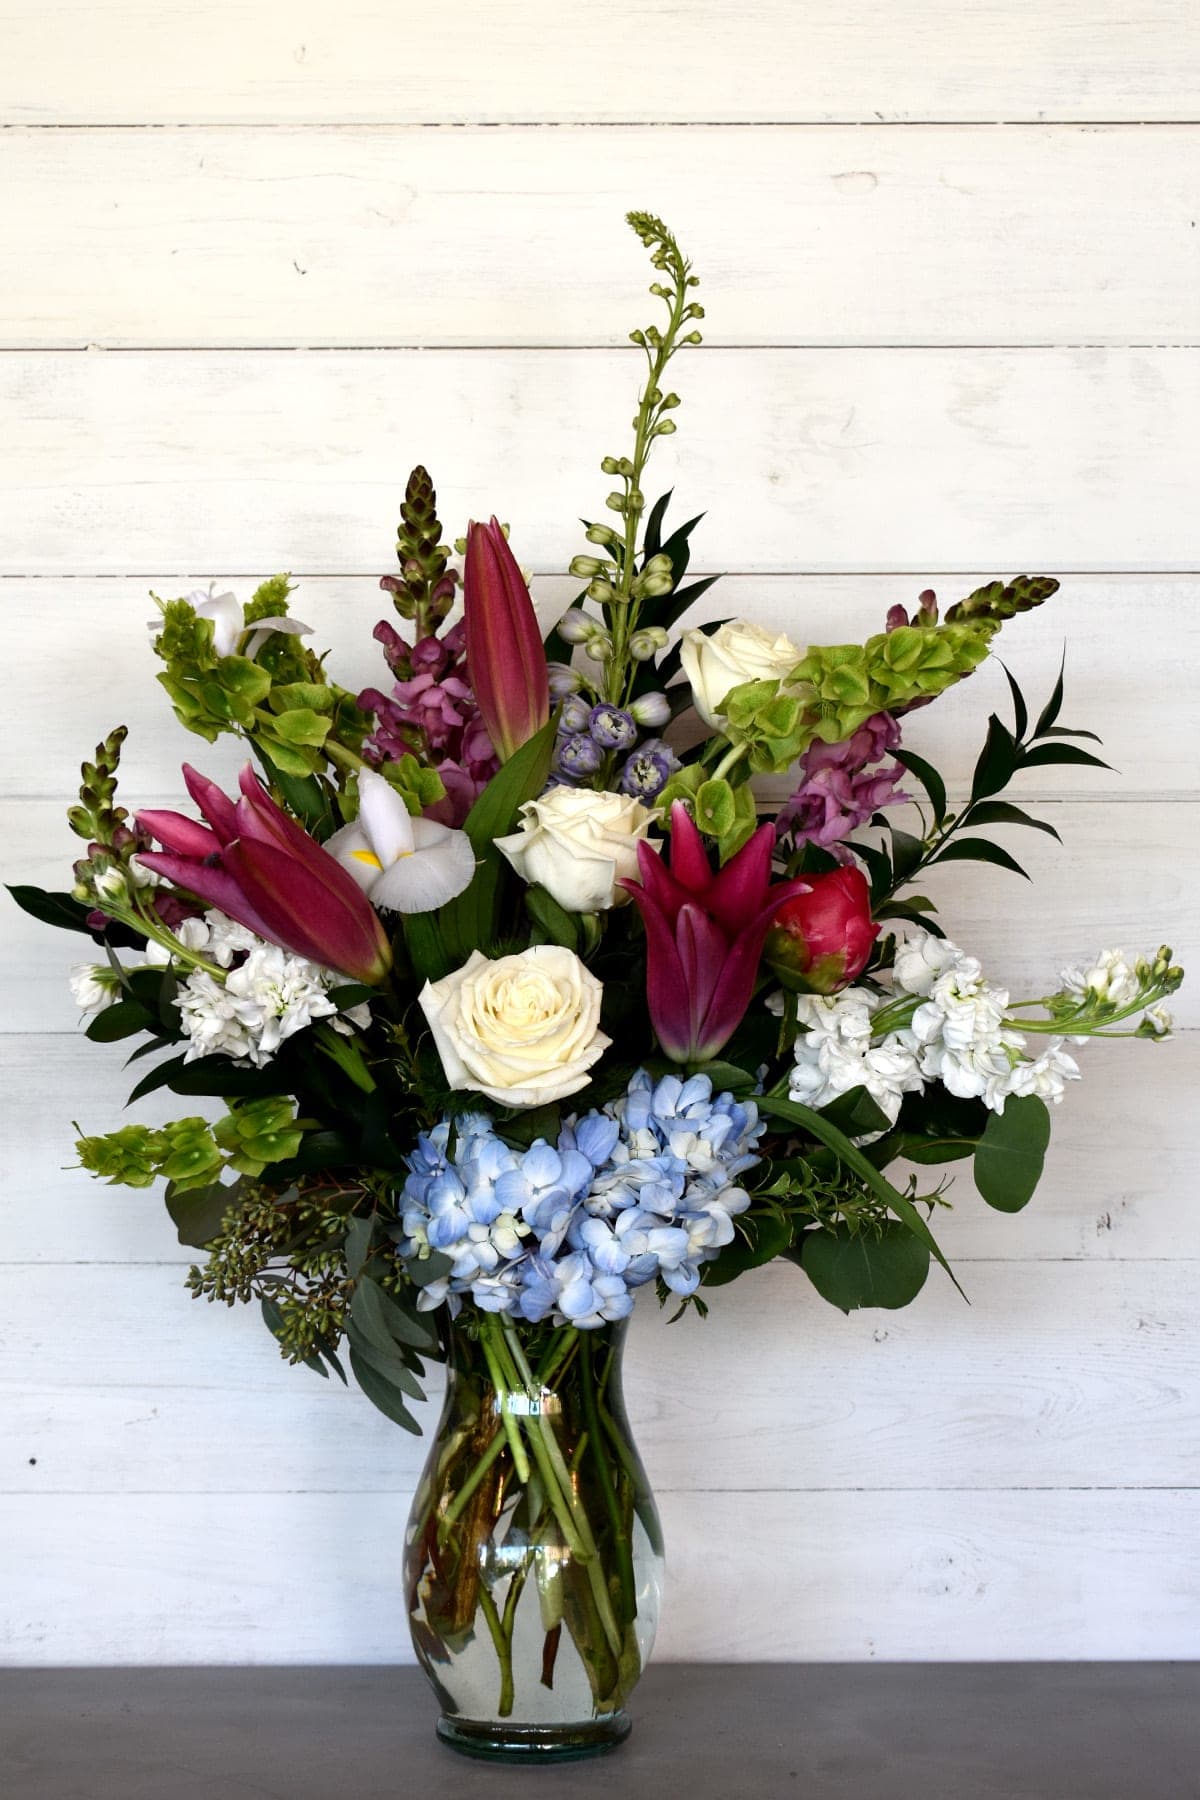 Jennifer - This arrangement is a beautiful English garden featuring a mix of roses, hydrangea, lilies, snapdragons, stock, delphinium, greens, and filler. 